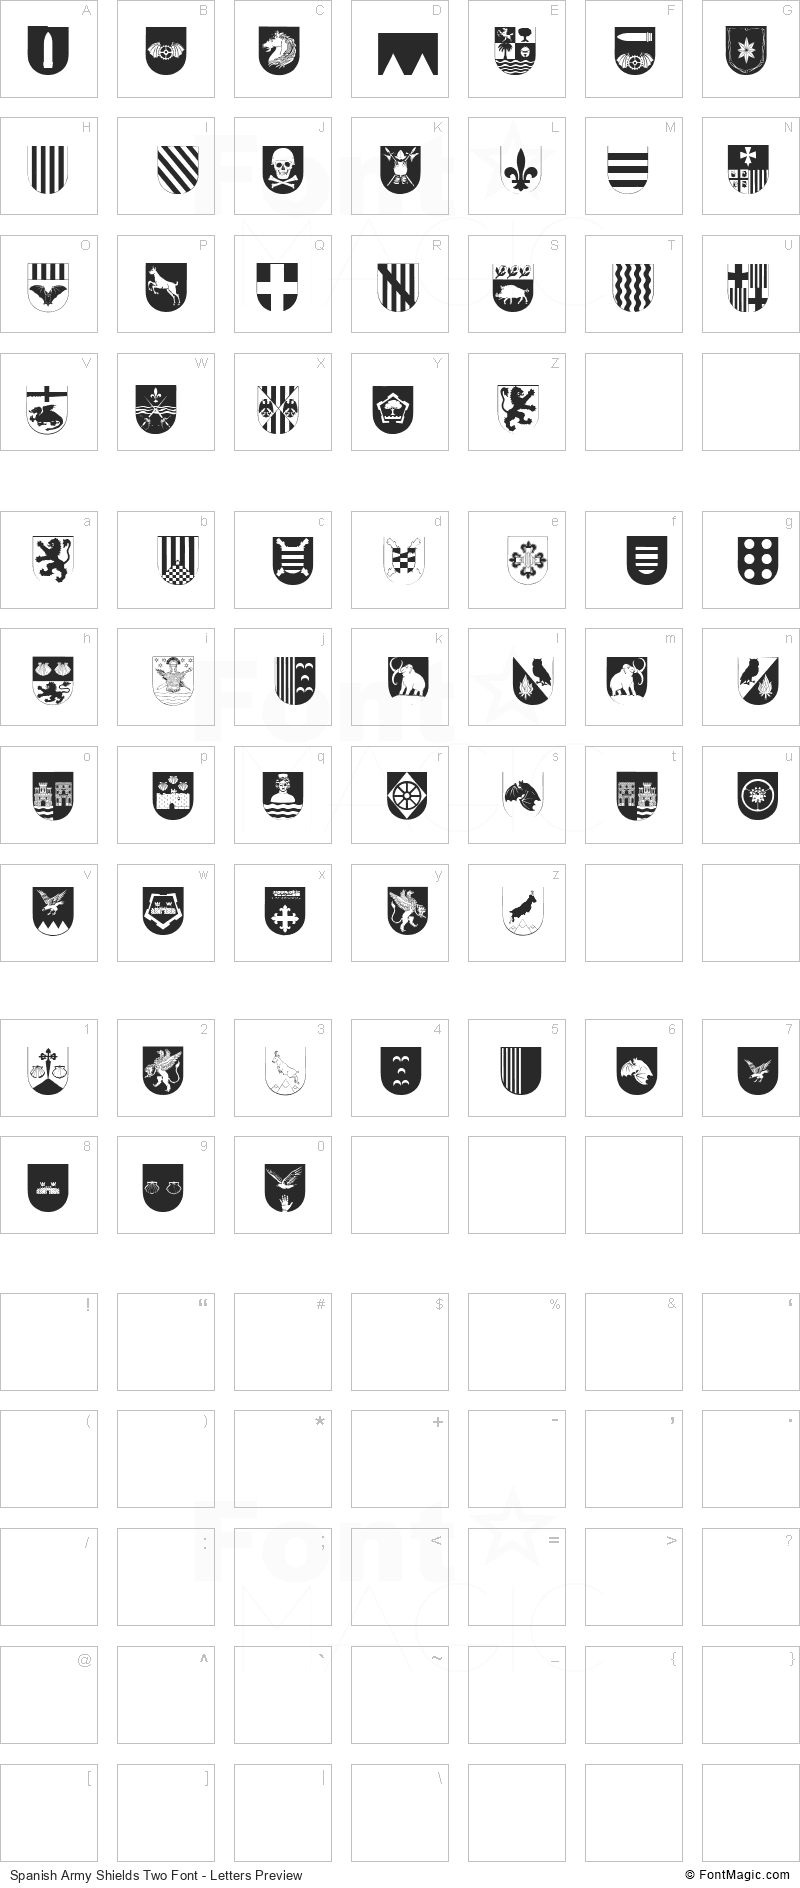 Spanish Army Shields Two Font - All Latters Preview Chart